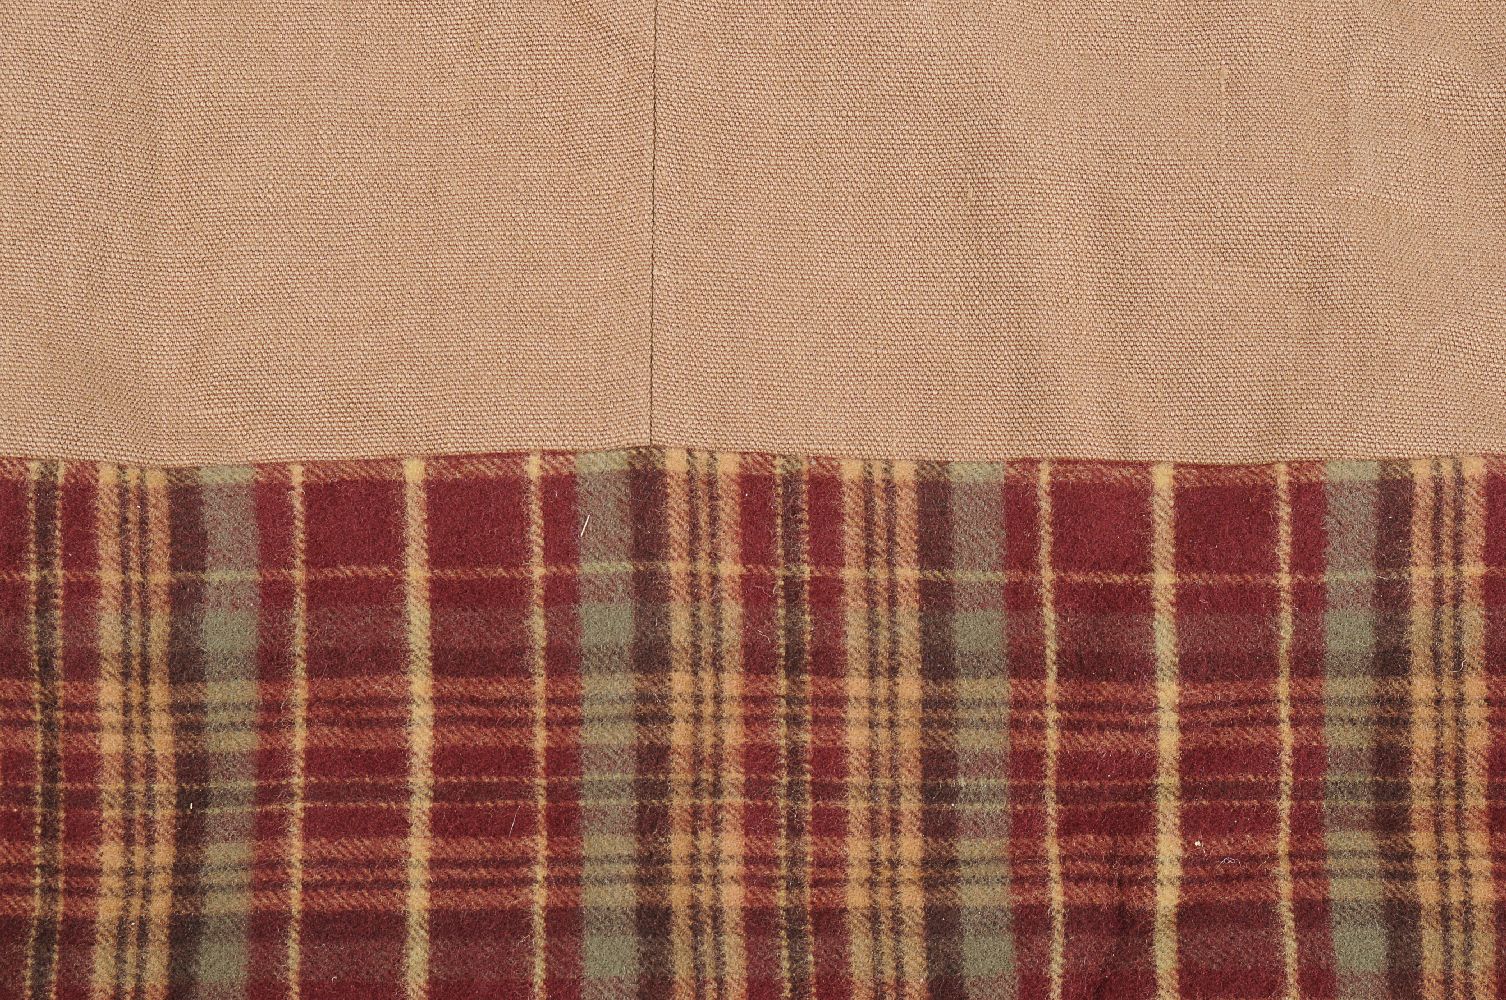 Ralph Lauren, a pair of curtains - Image 2 of 3